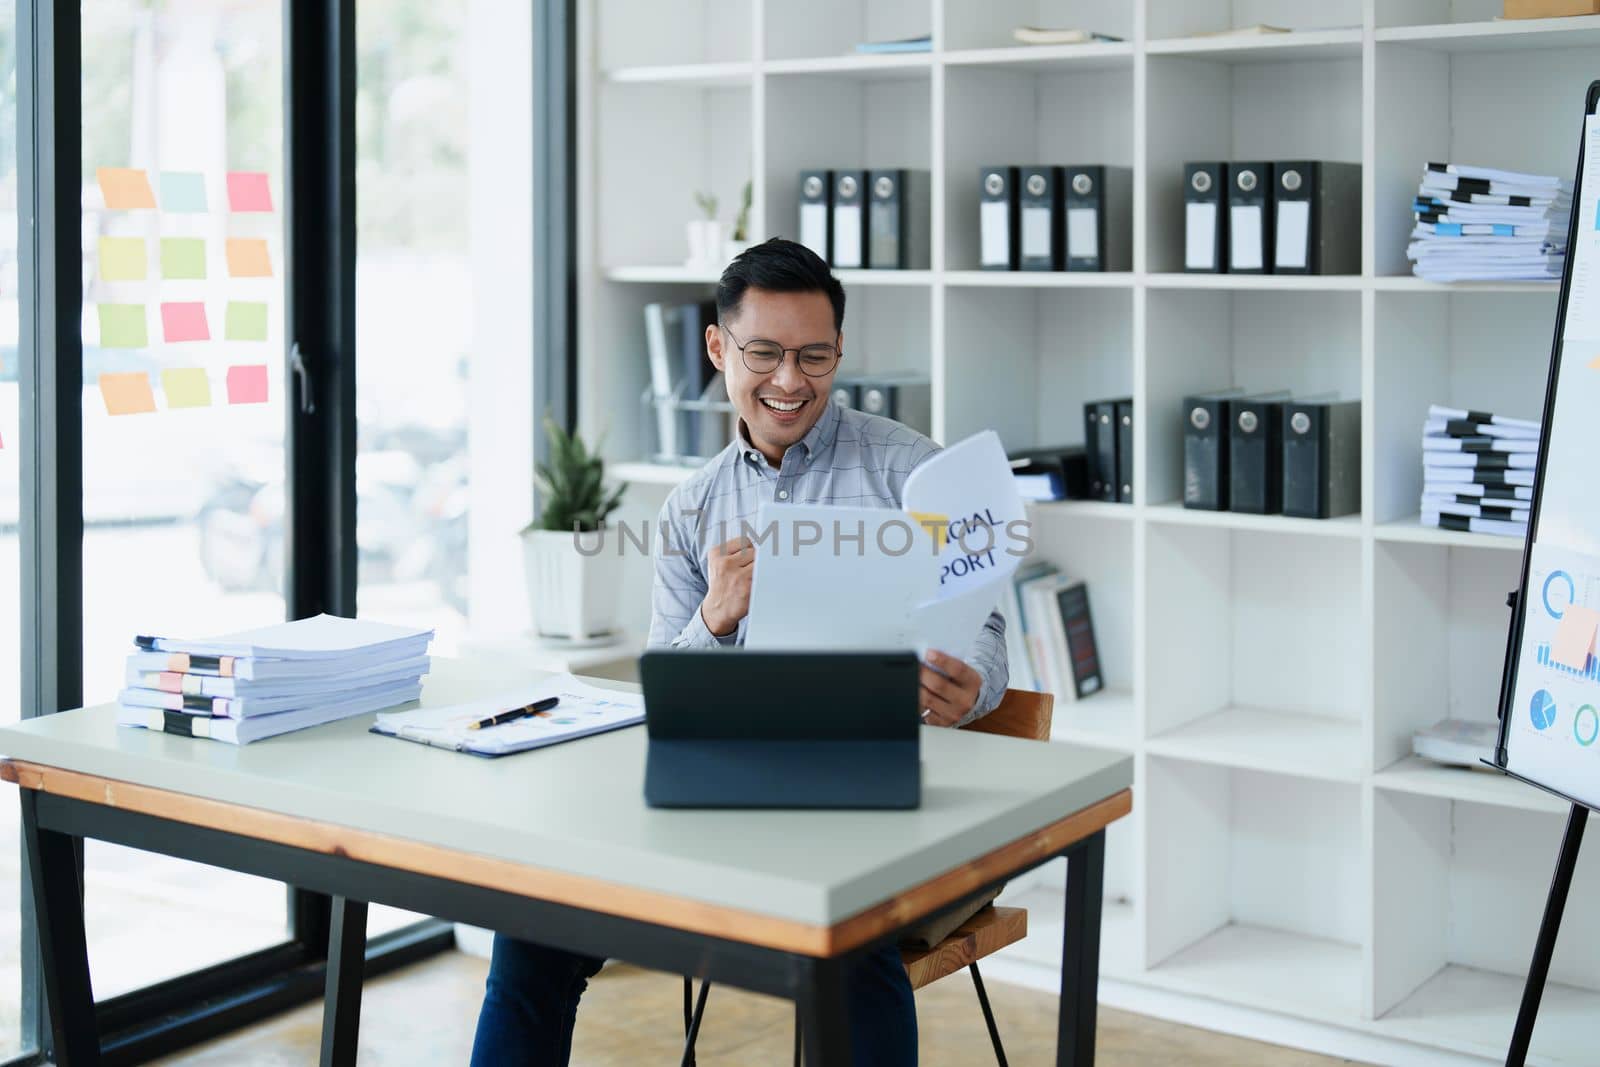 Portrait of a man business owner showing a happy smiling face as he has successfully invested her business using computers and financial budget documents at work.